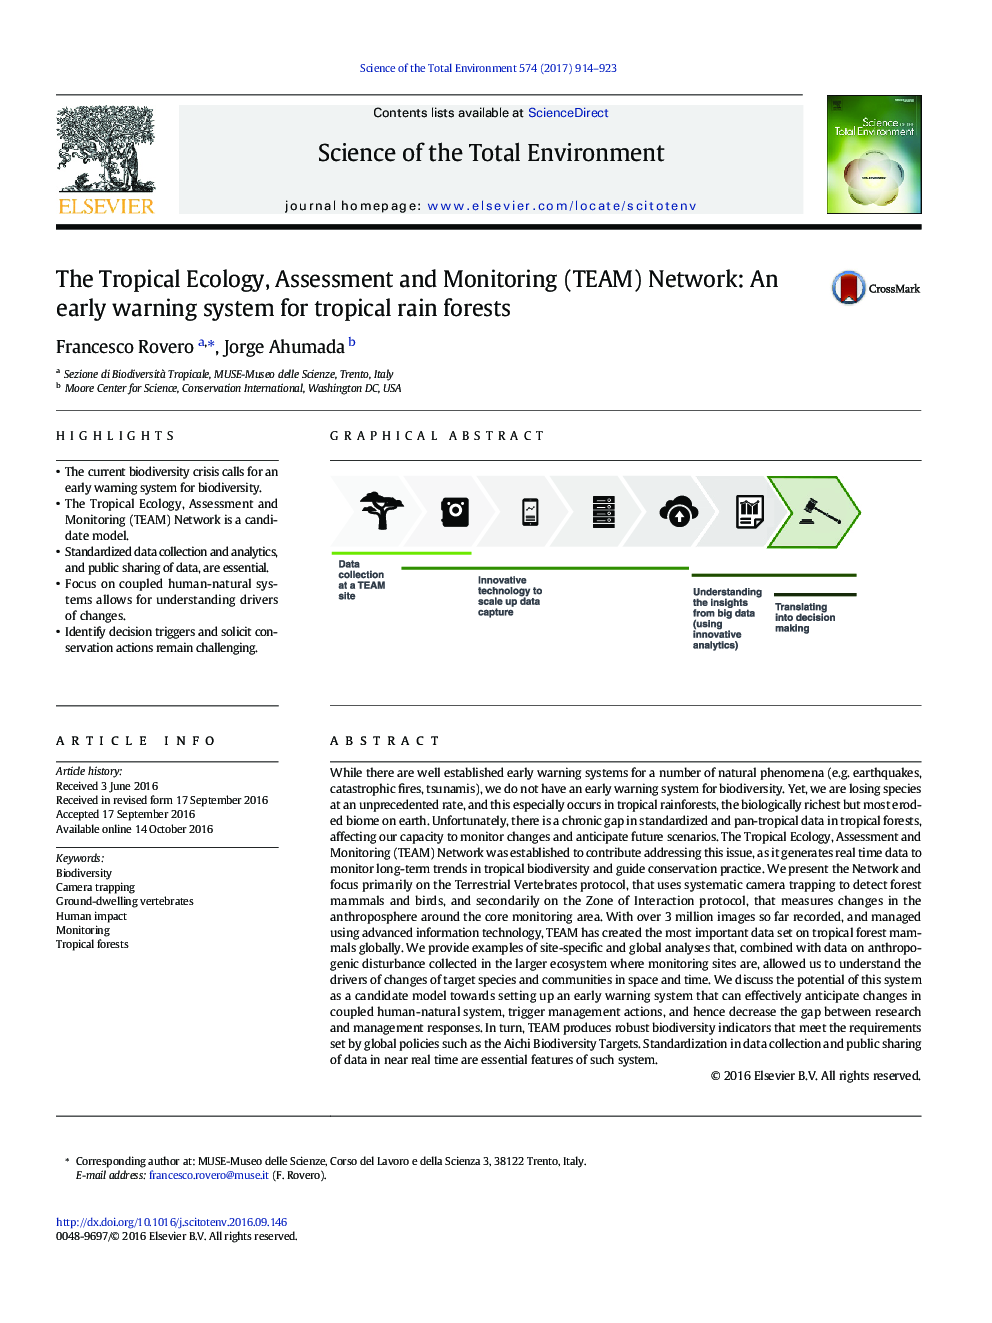 The Tropical Ecology, Assessment and Monitoring (TEAM) Network: An early warning system for tropical rain forests